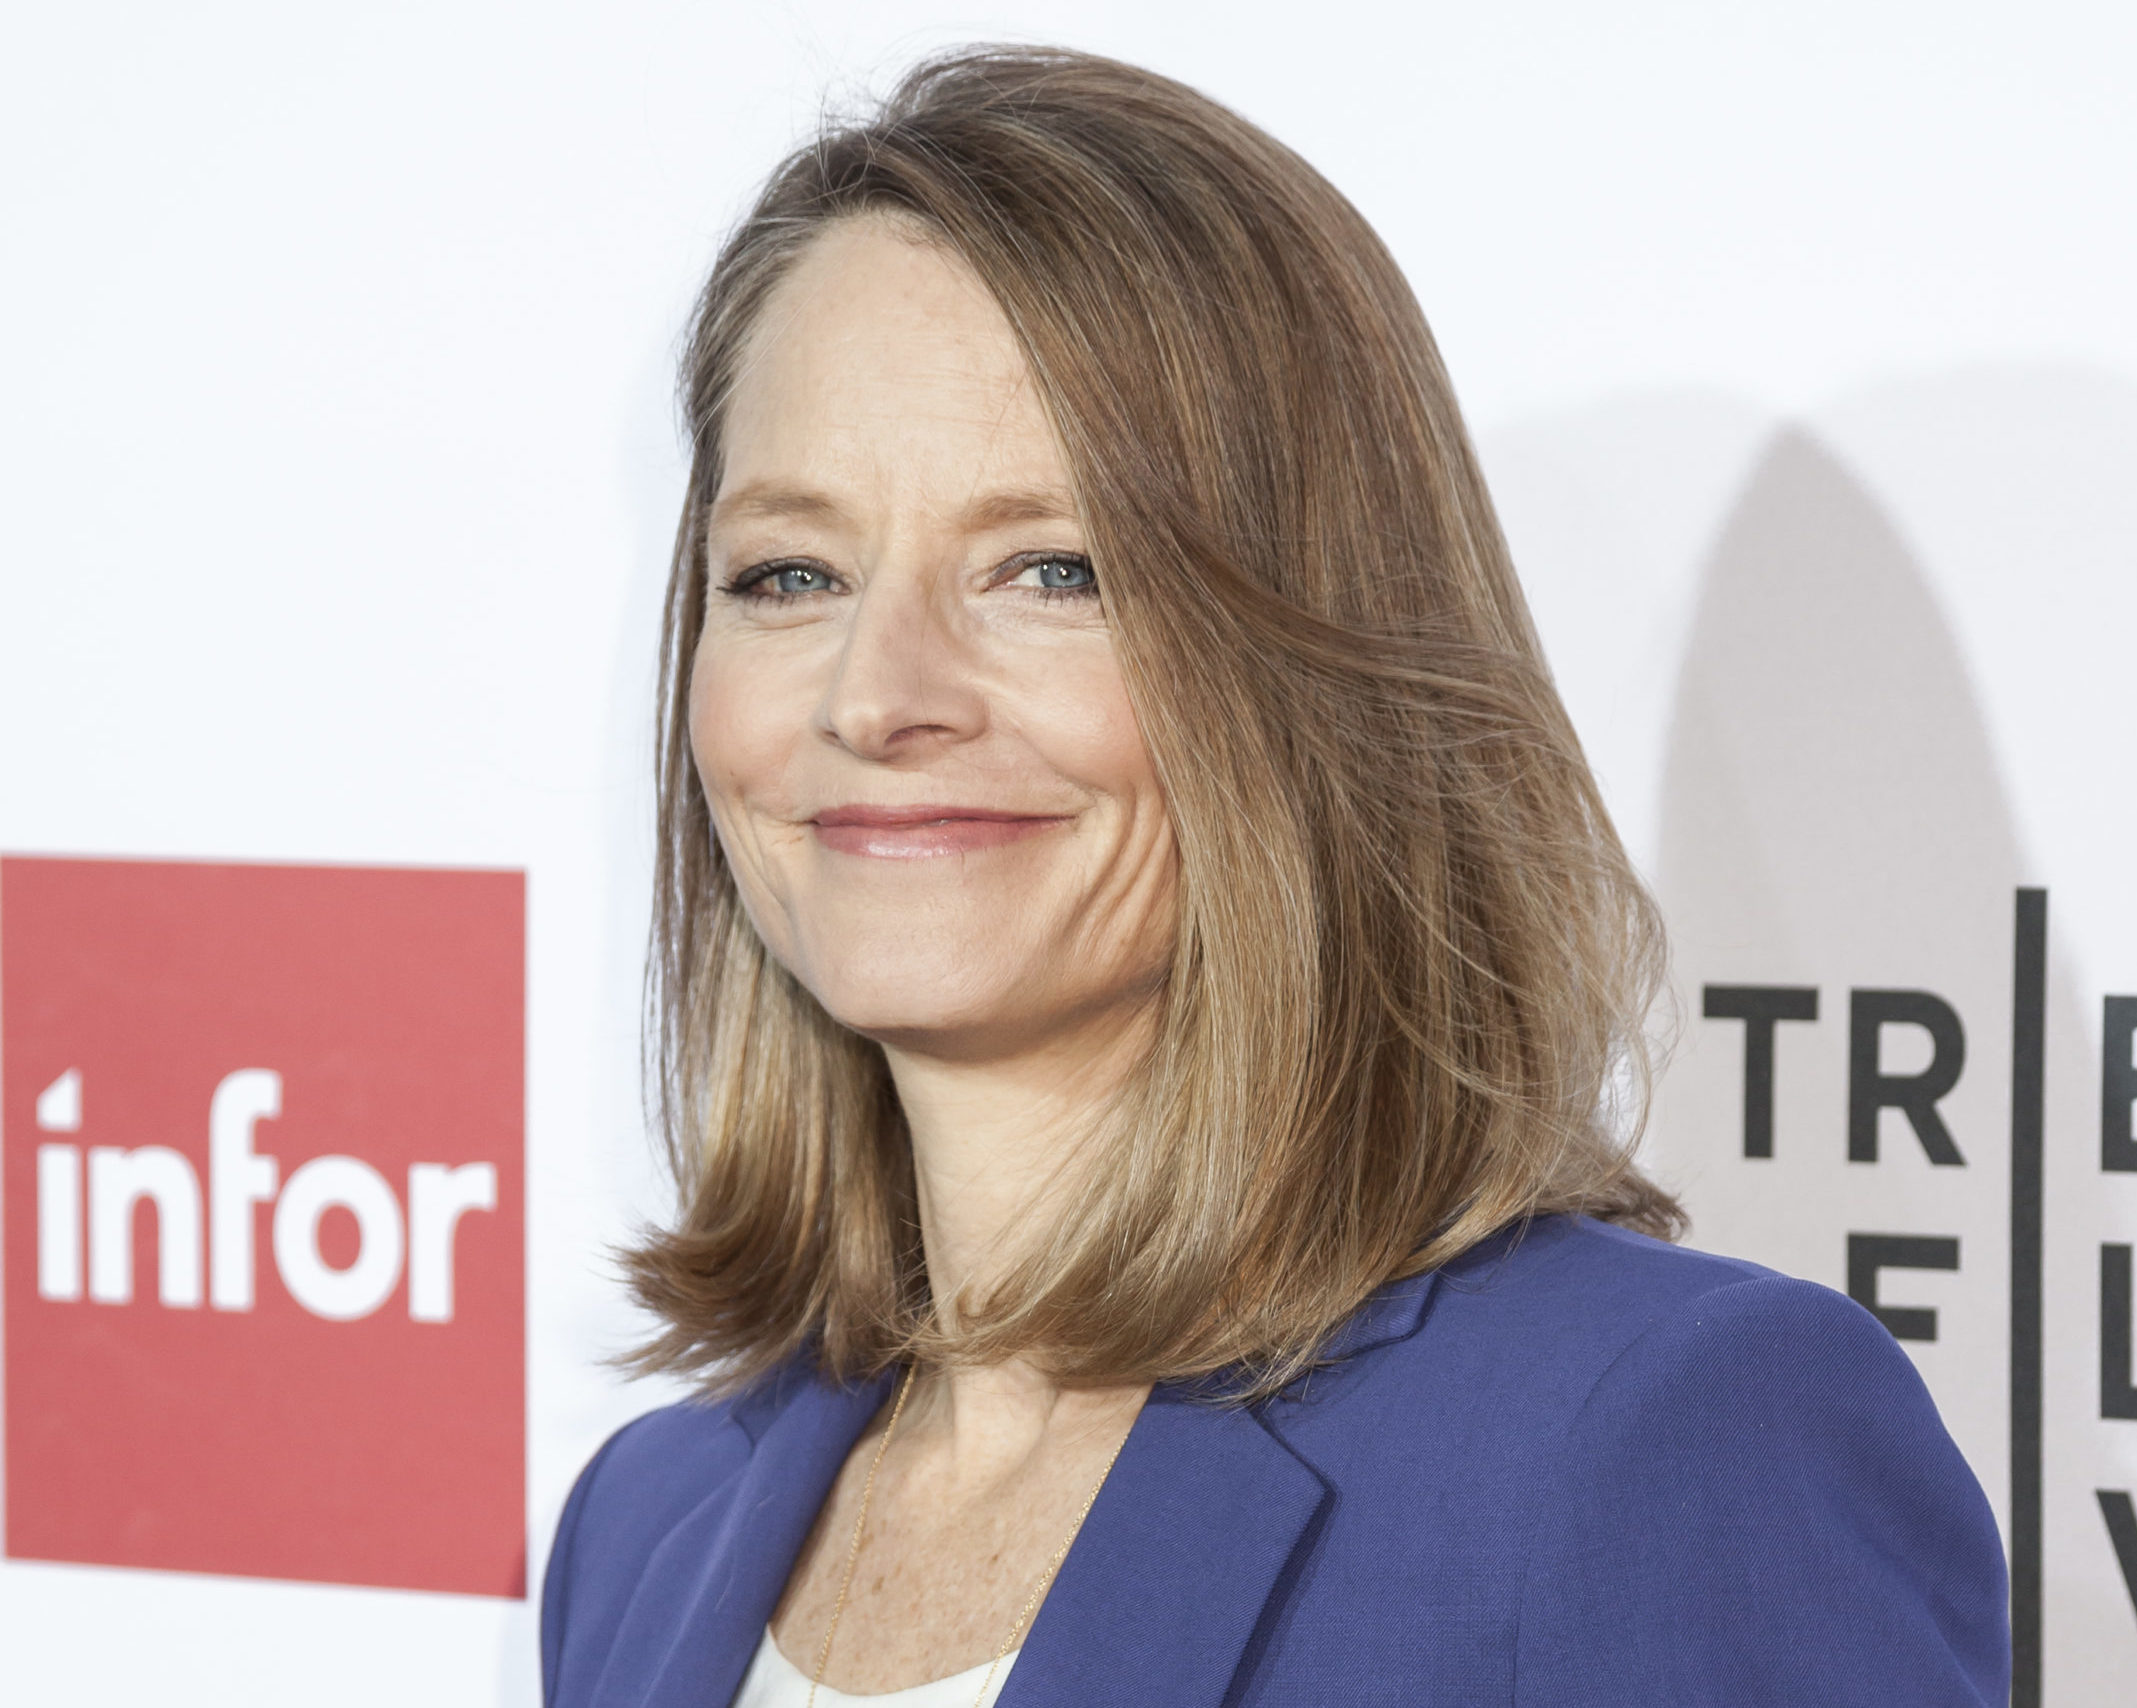 #True Detective: Season Four Renewal for HBO Series, Jodie Foster to Star